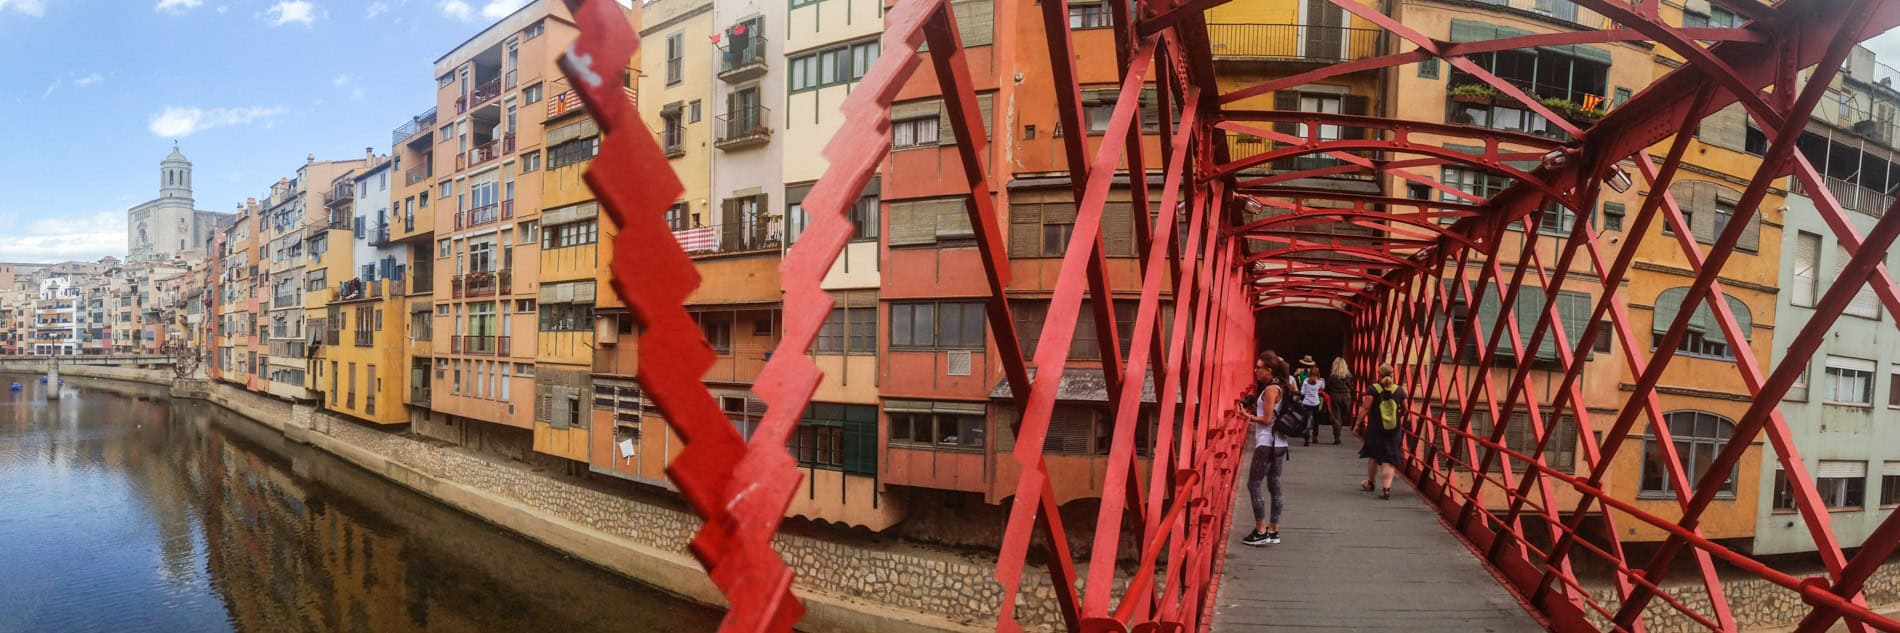 View from the red, metal grates of the Peixateries Velles Bridge in Girona, looking towards a row of colourful buildings. 